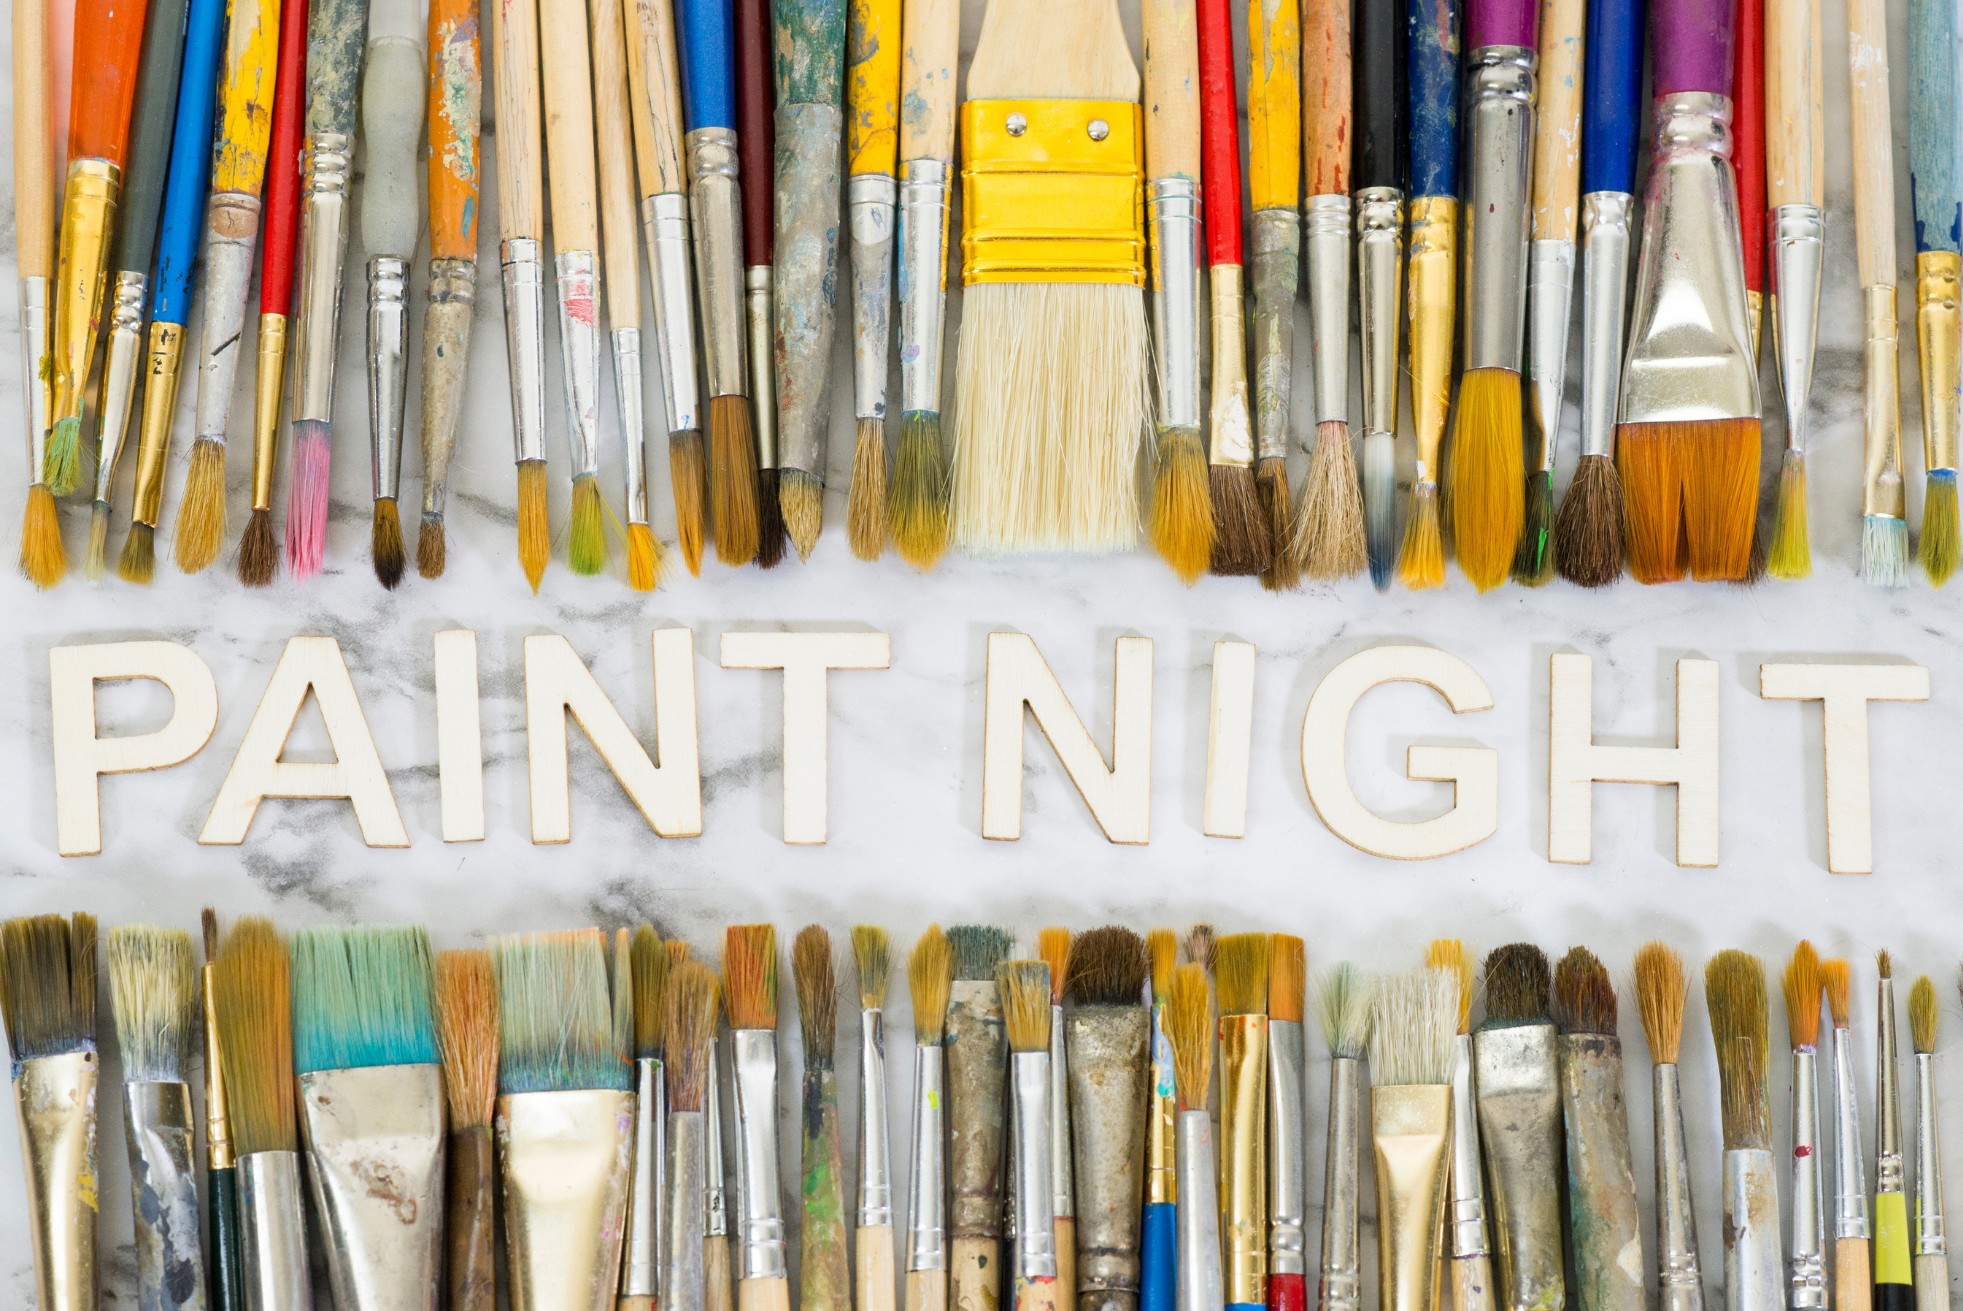 Rows of paintbrushes with wooden letters spelling "Paint Night"